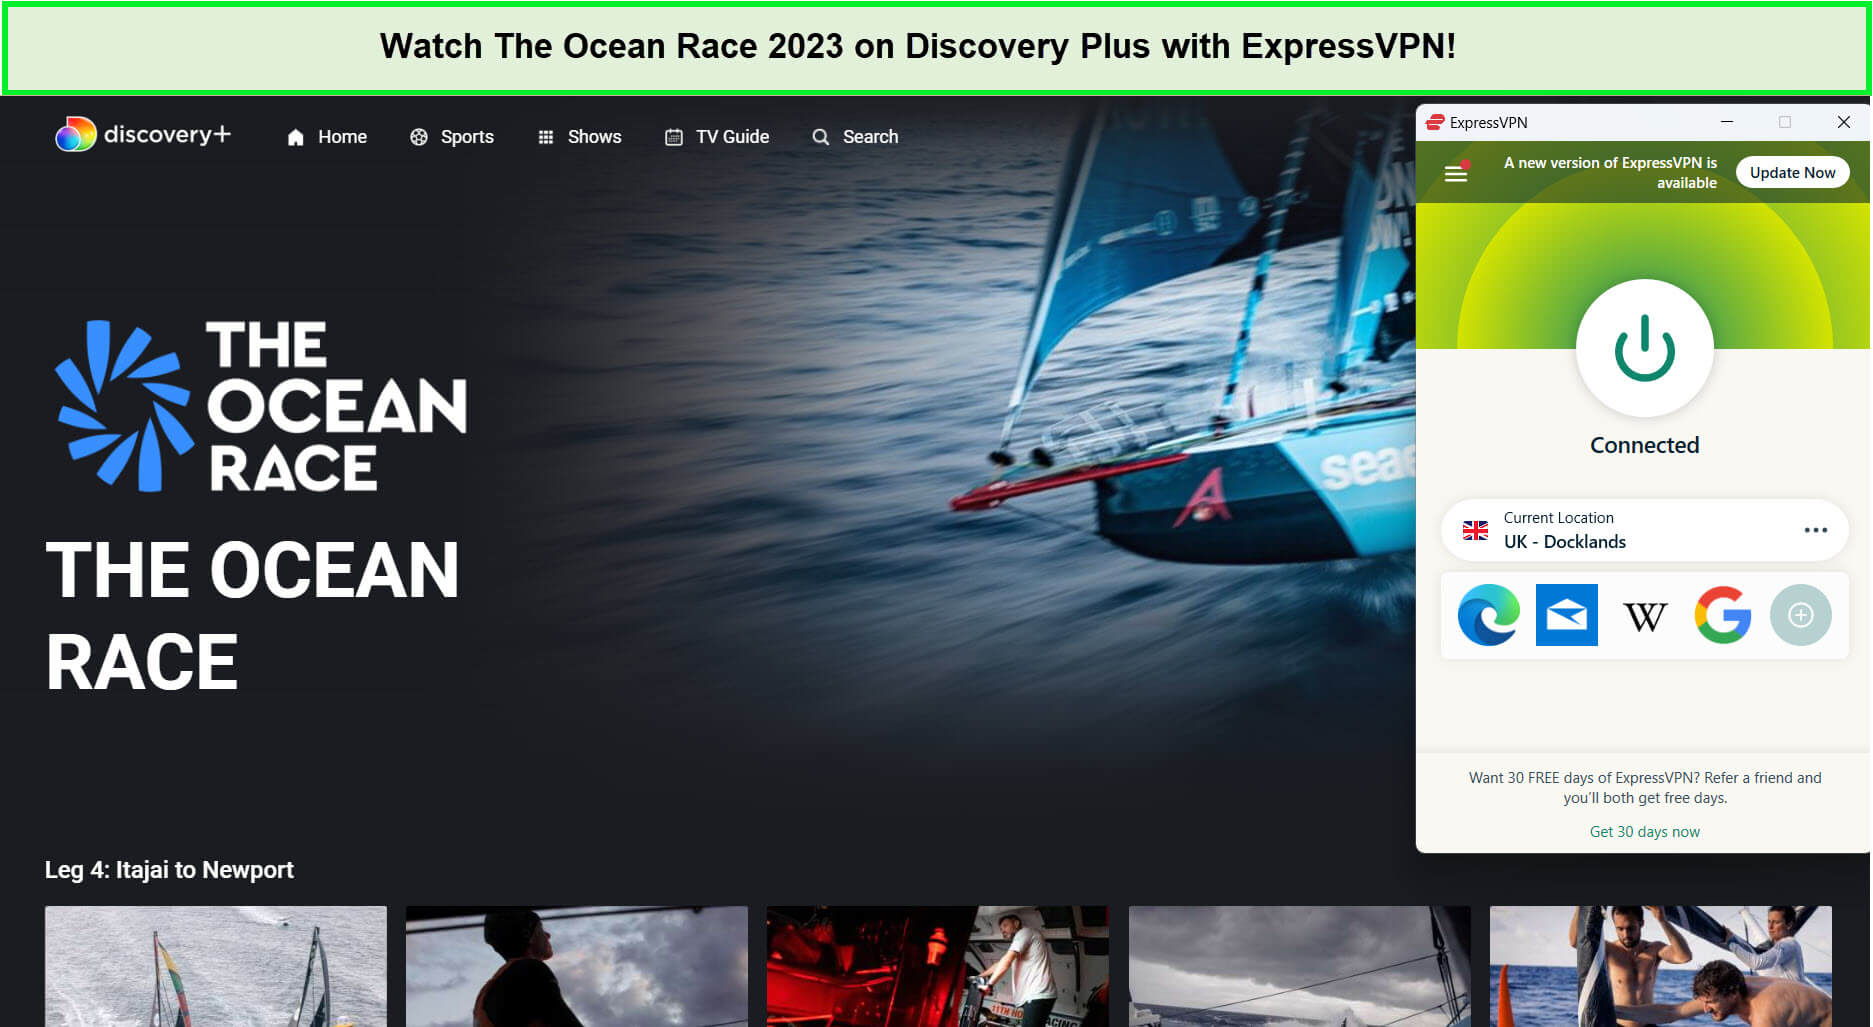 expressvpn-unblocks-the-ocean-race-2023-live-in-Netherlands-on-discovery-plus